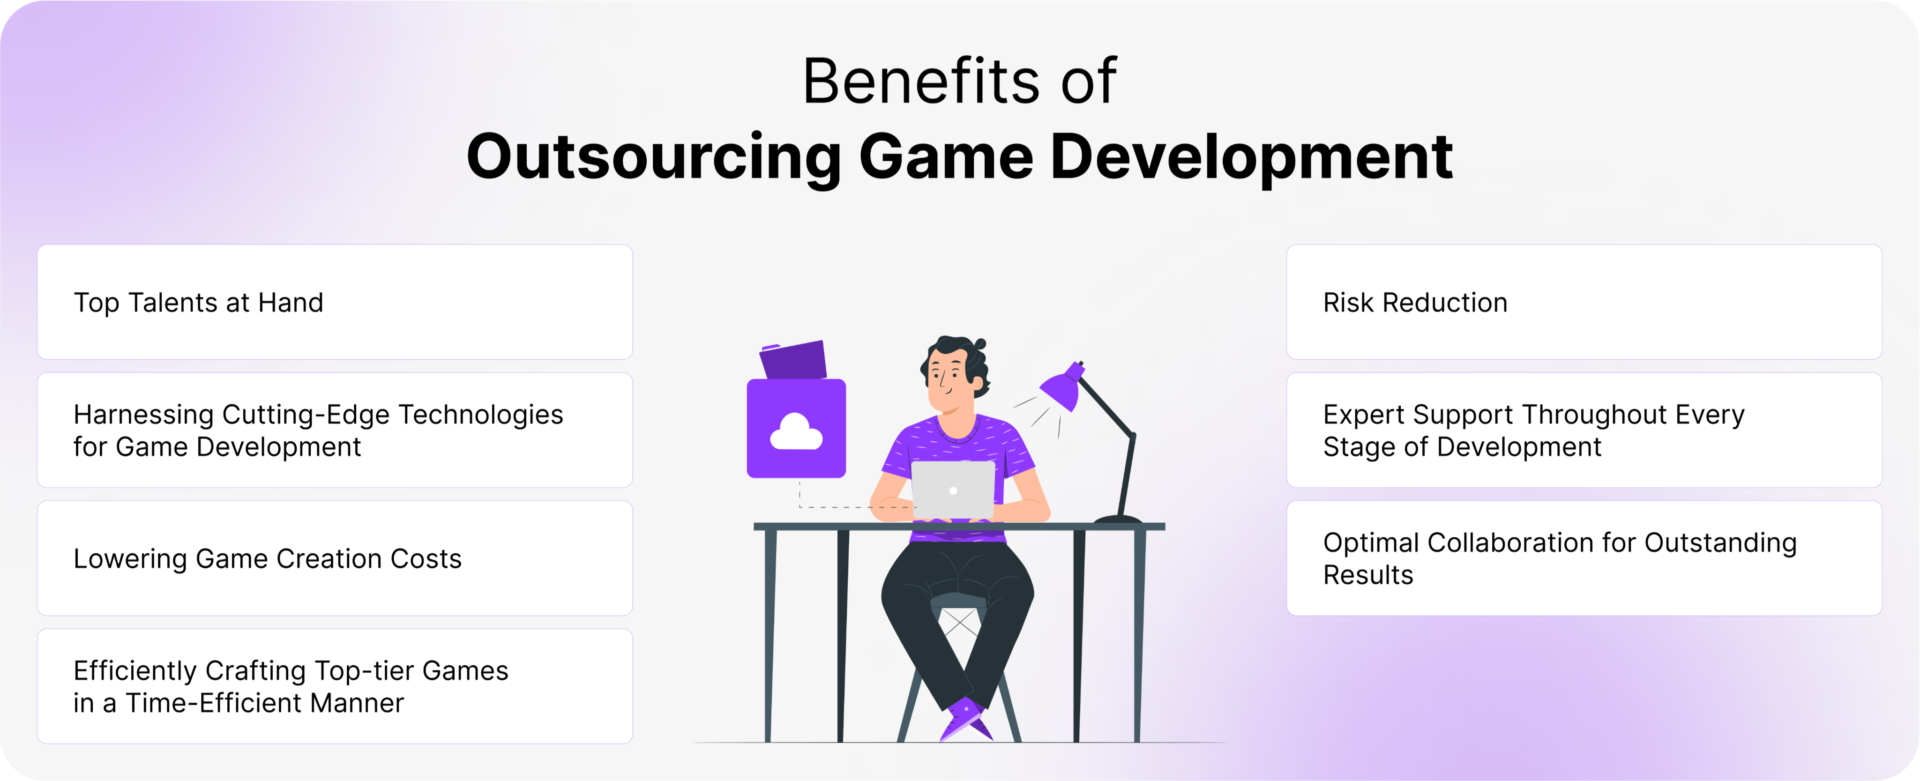 Outsourcing Game Development: 7 Benefits 